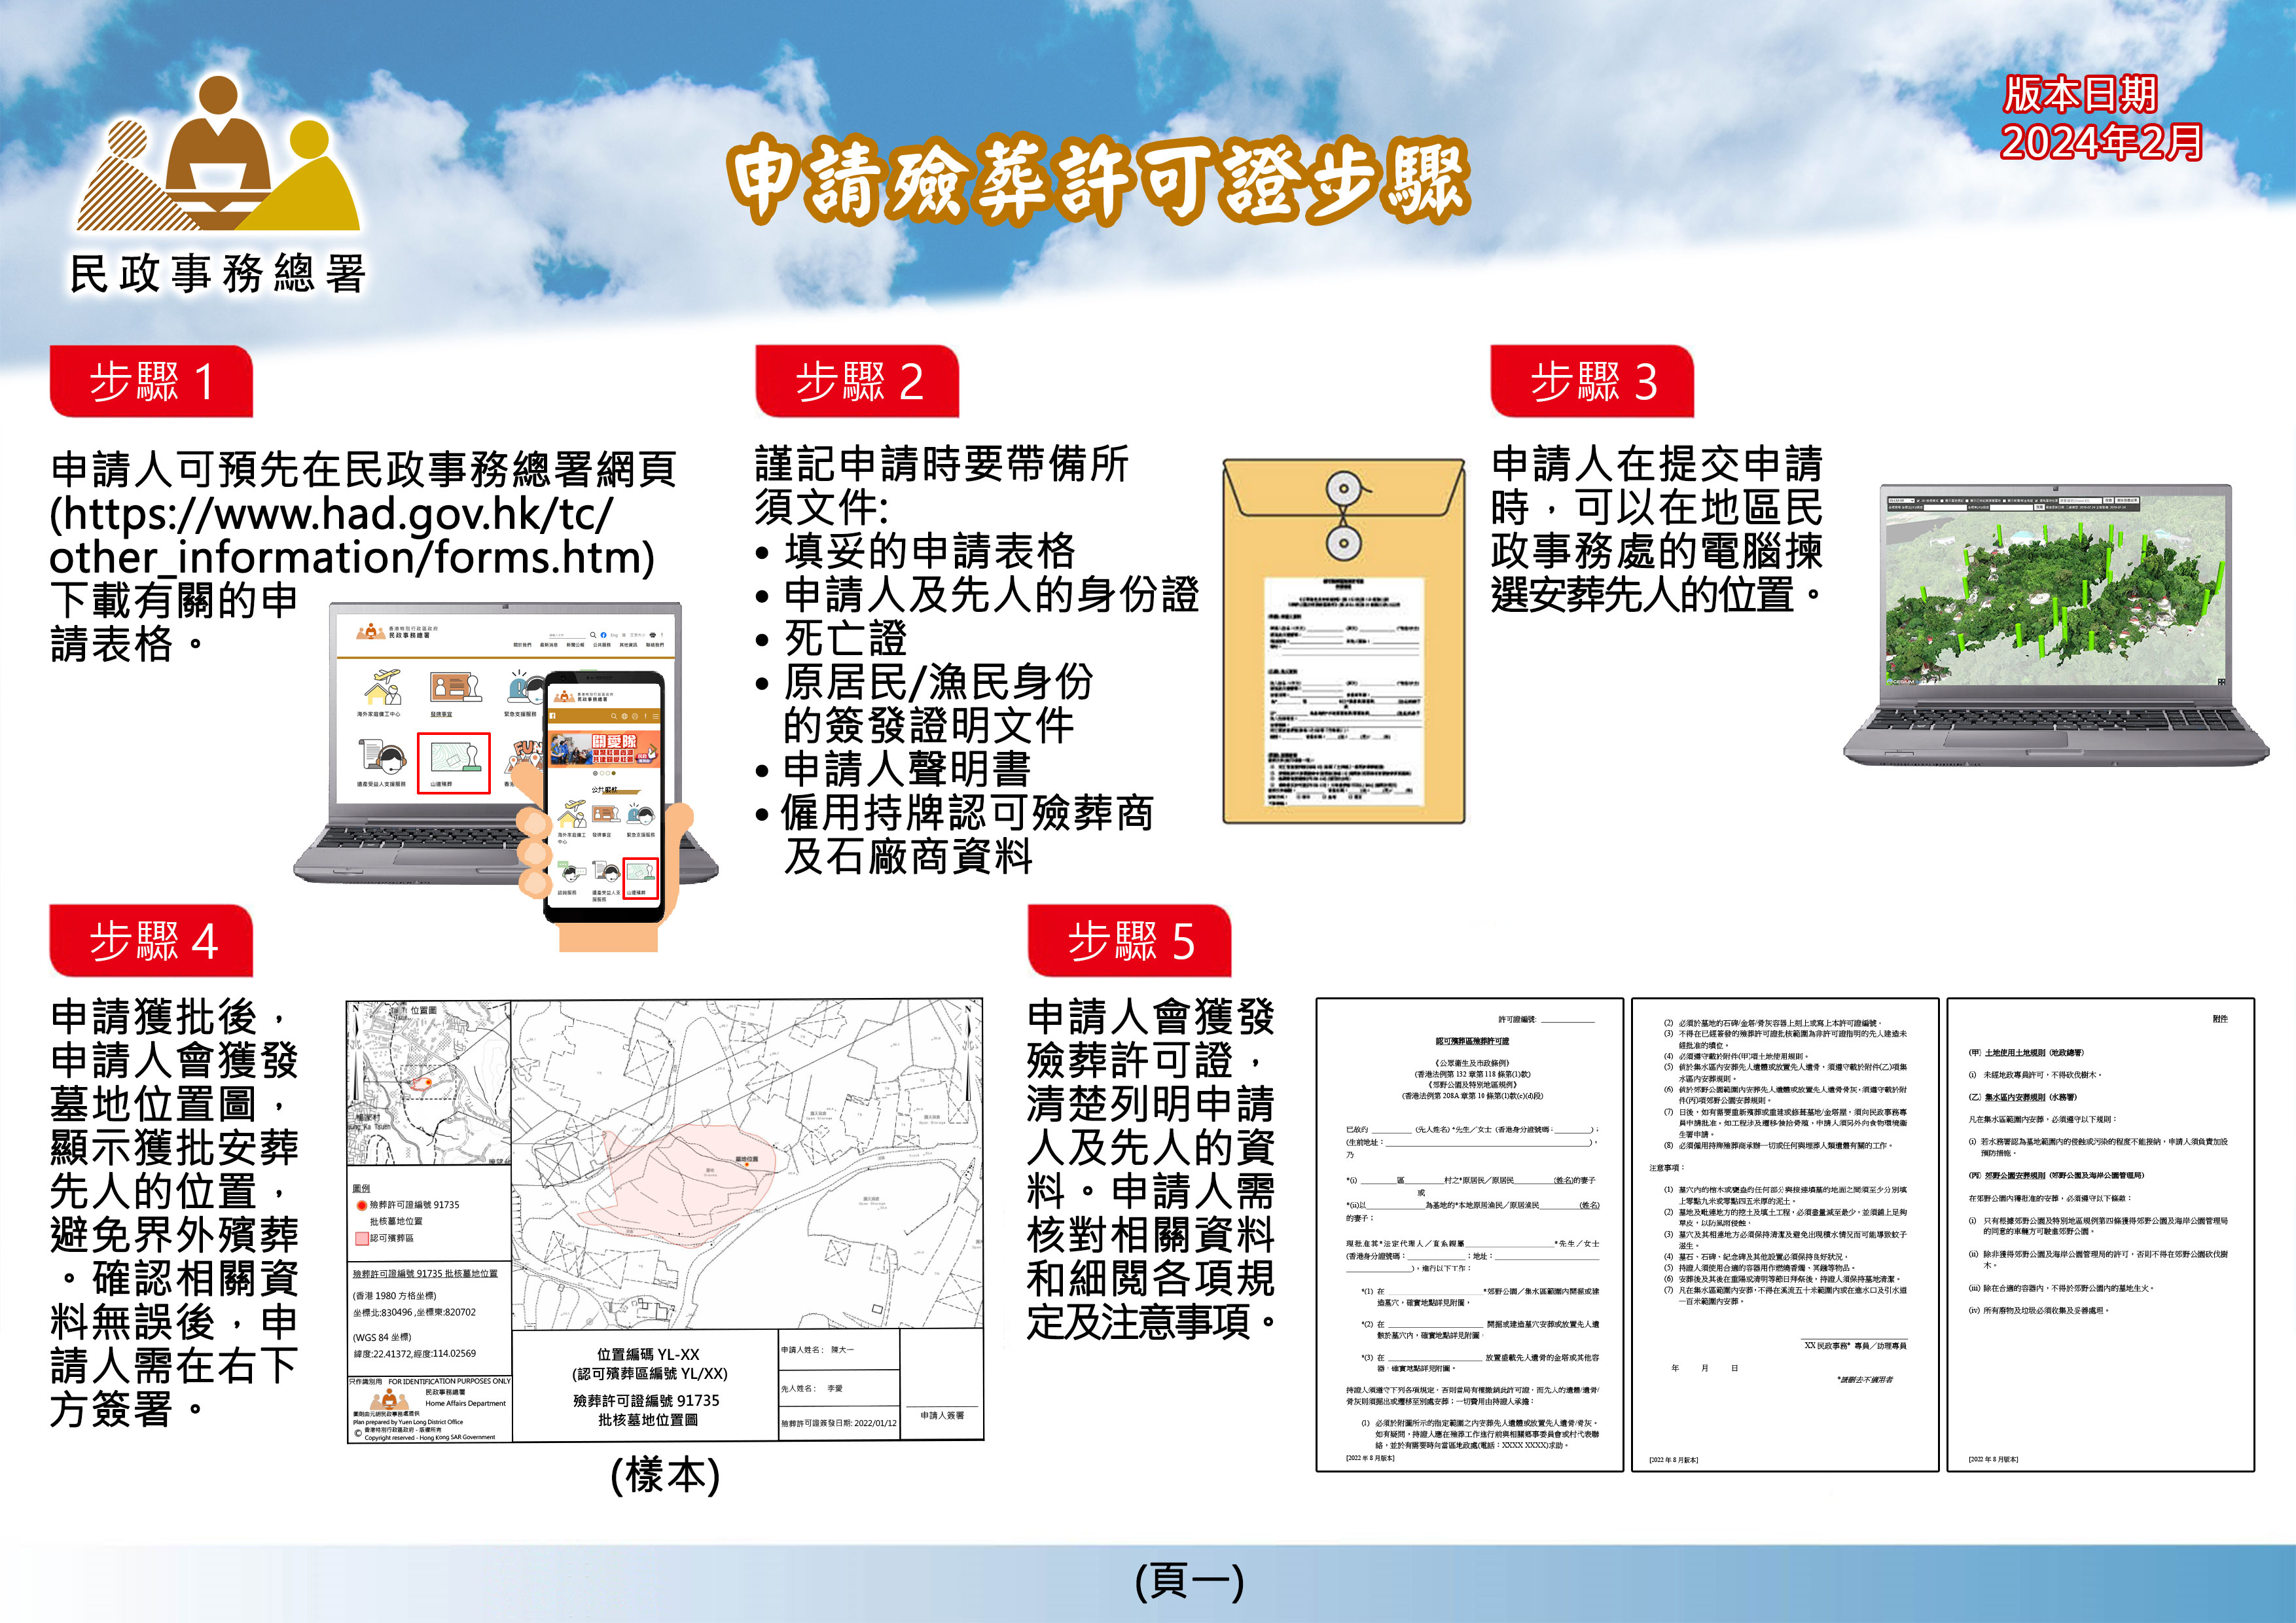 Procedure for Application for Certificate for Burial and Points to Note (Chinese Only)